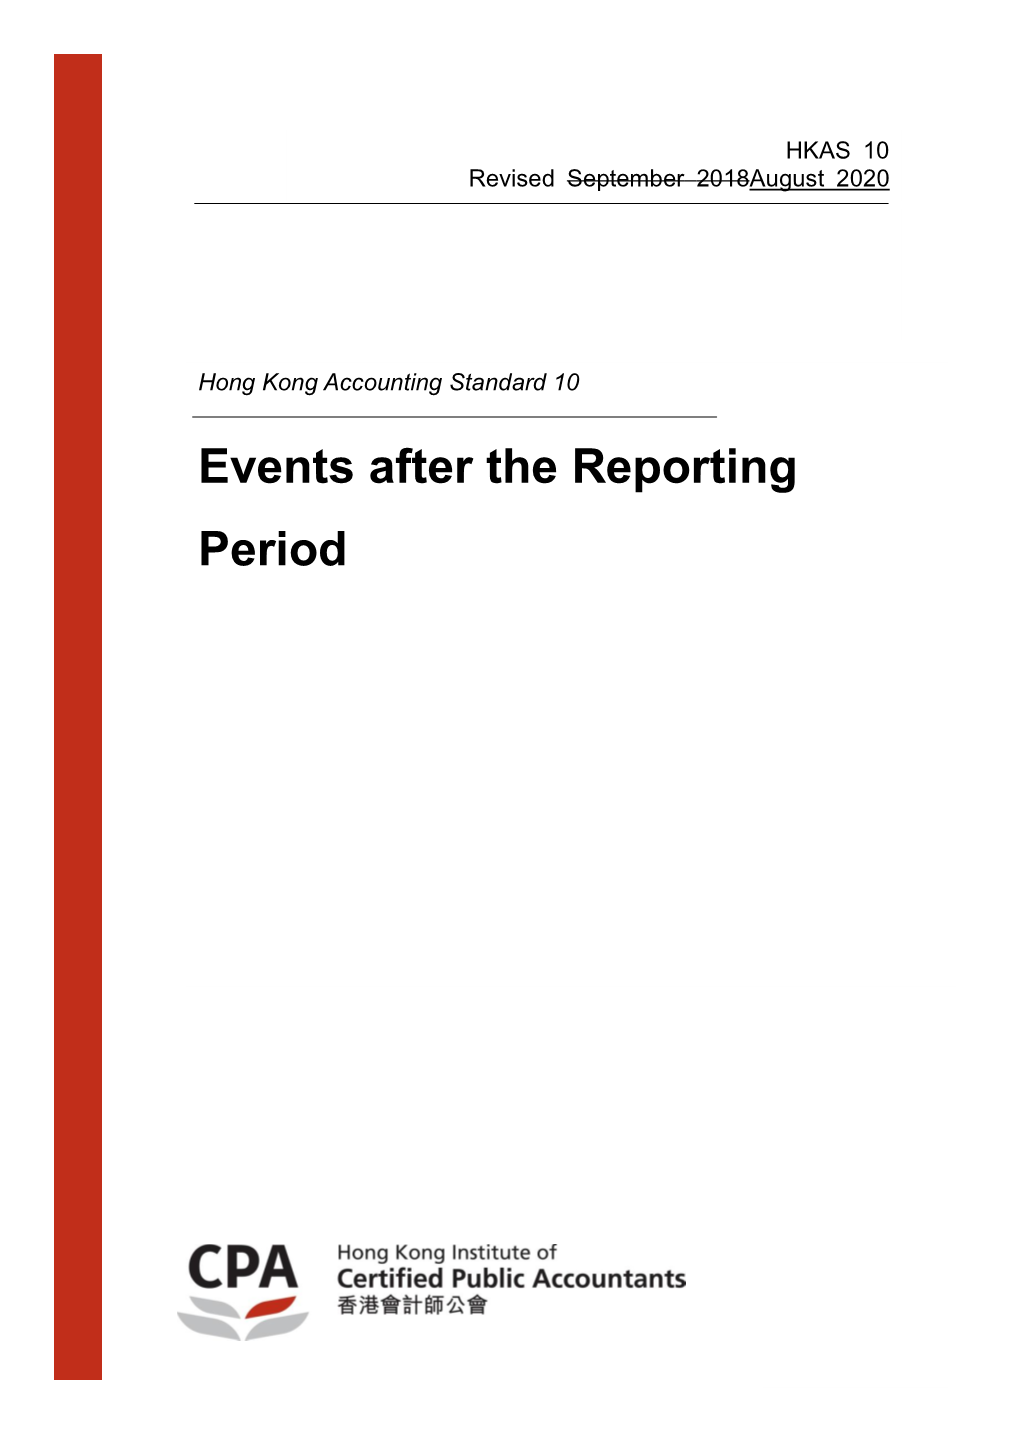 Events After the Reporting Period